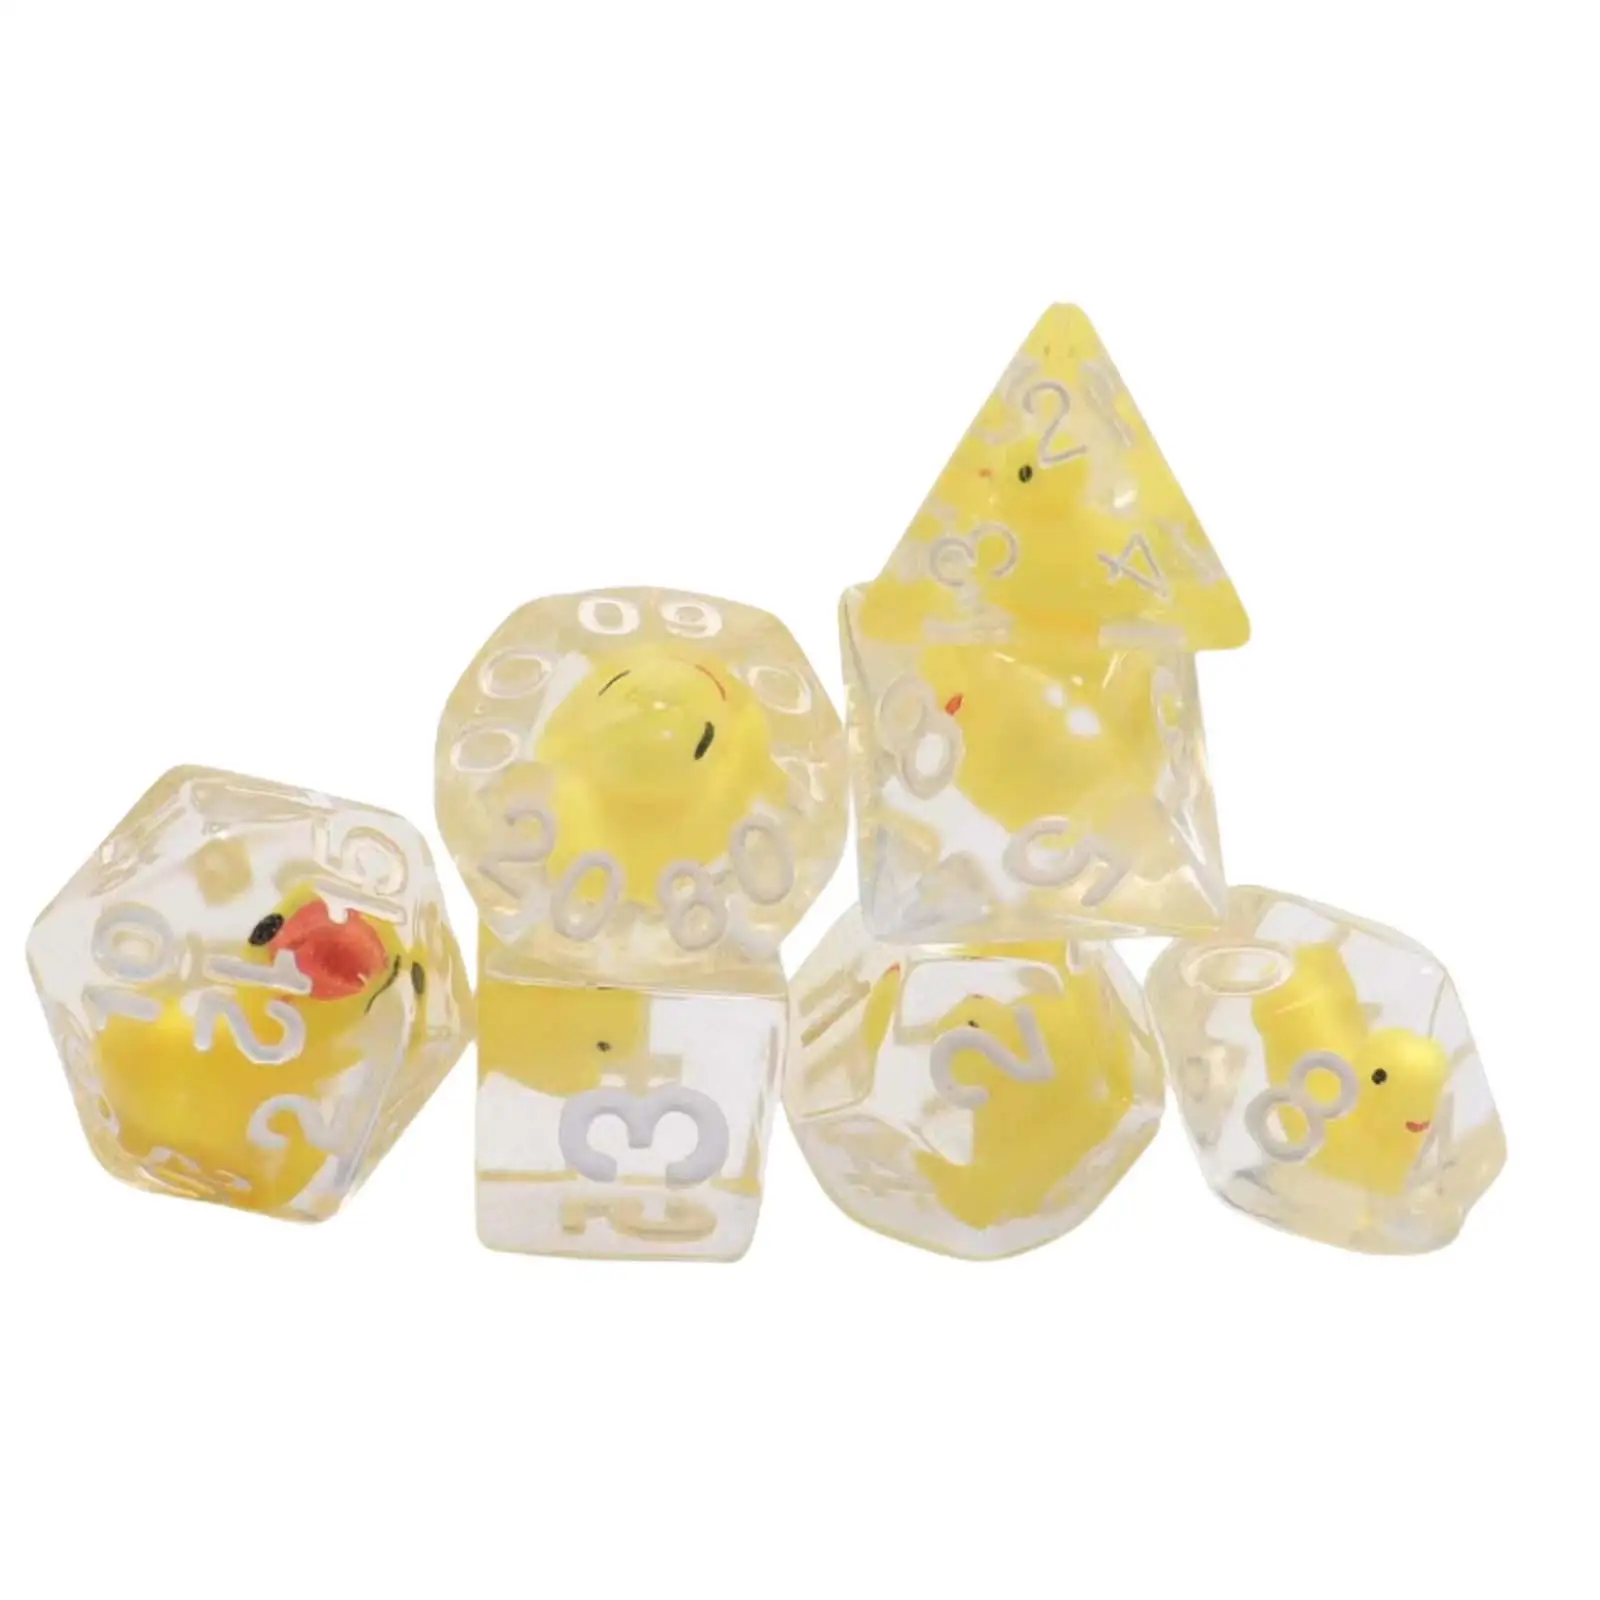 7Pcs Acrylic Dices Entertainment Toys Filled with Ducks Animals Supplies Polyhedral Dices for Party KTV Role Playing Game